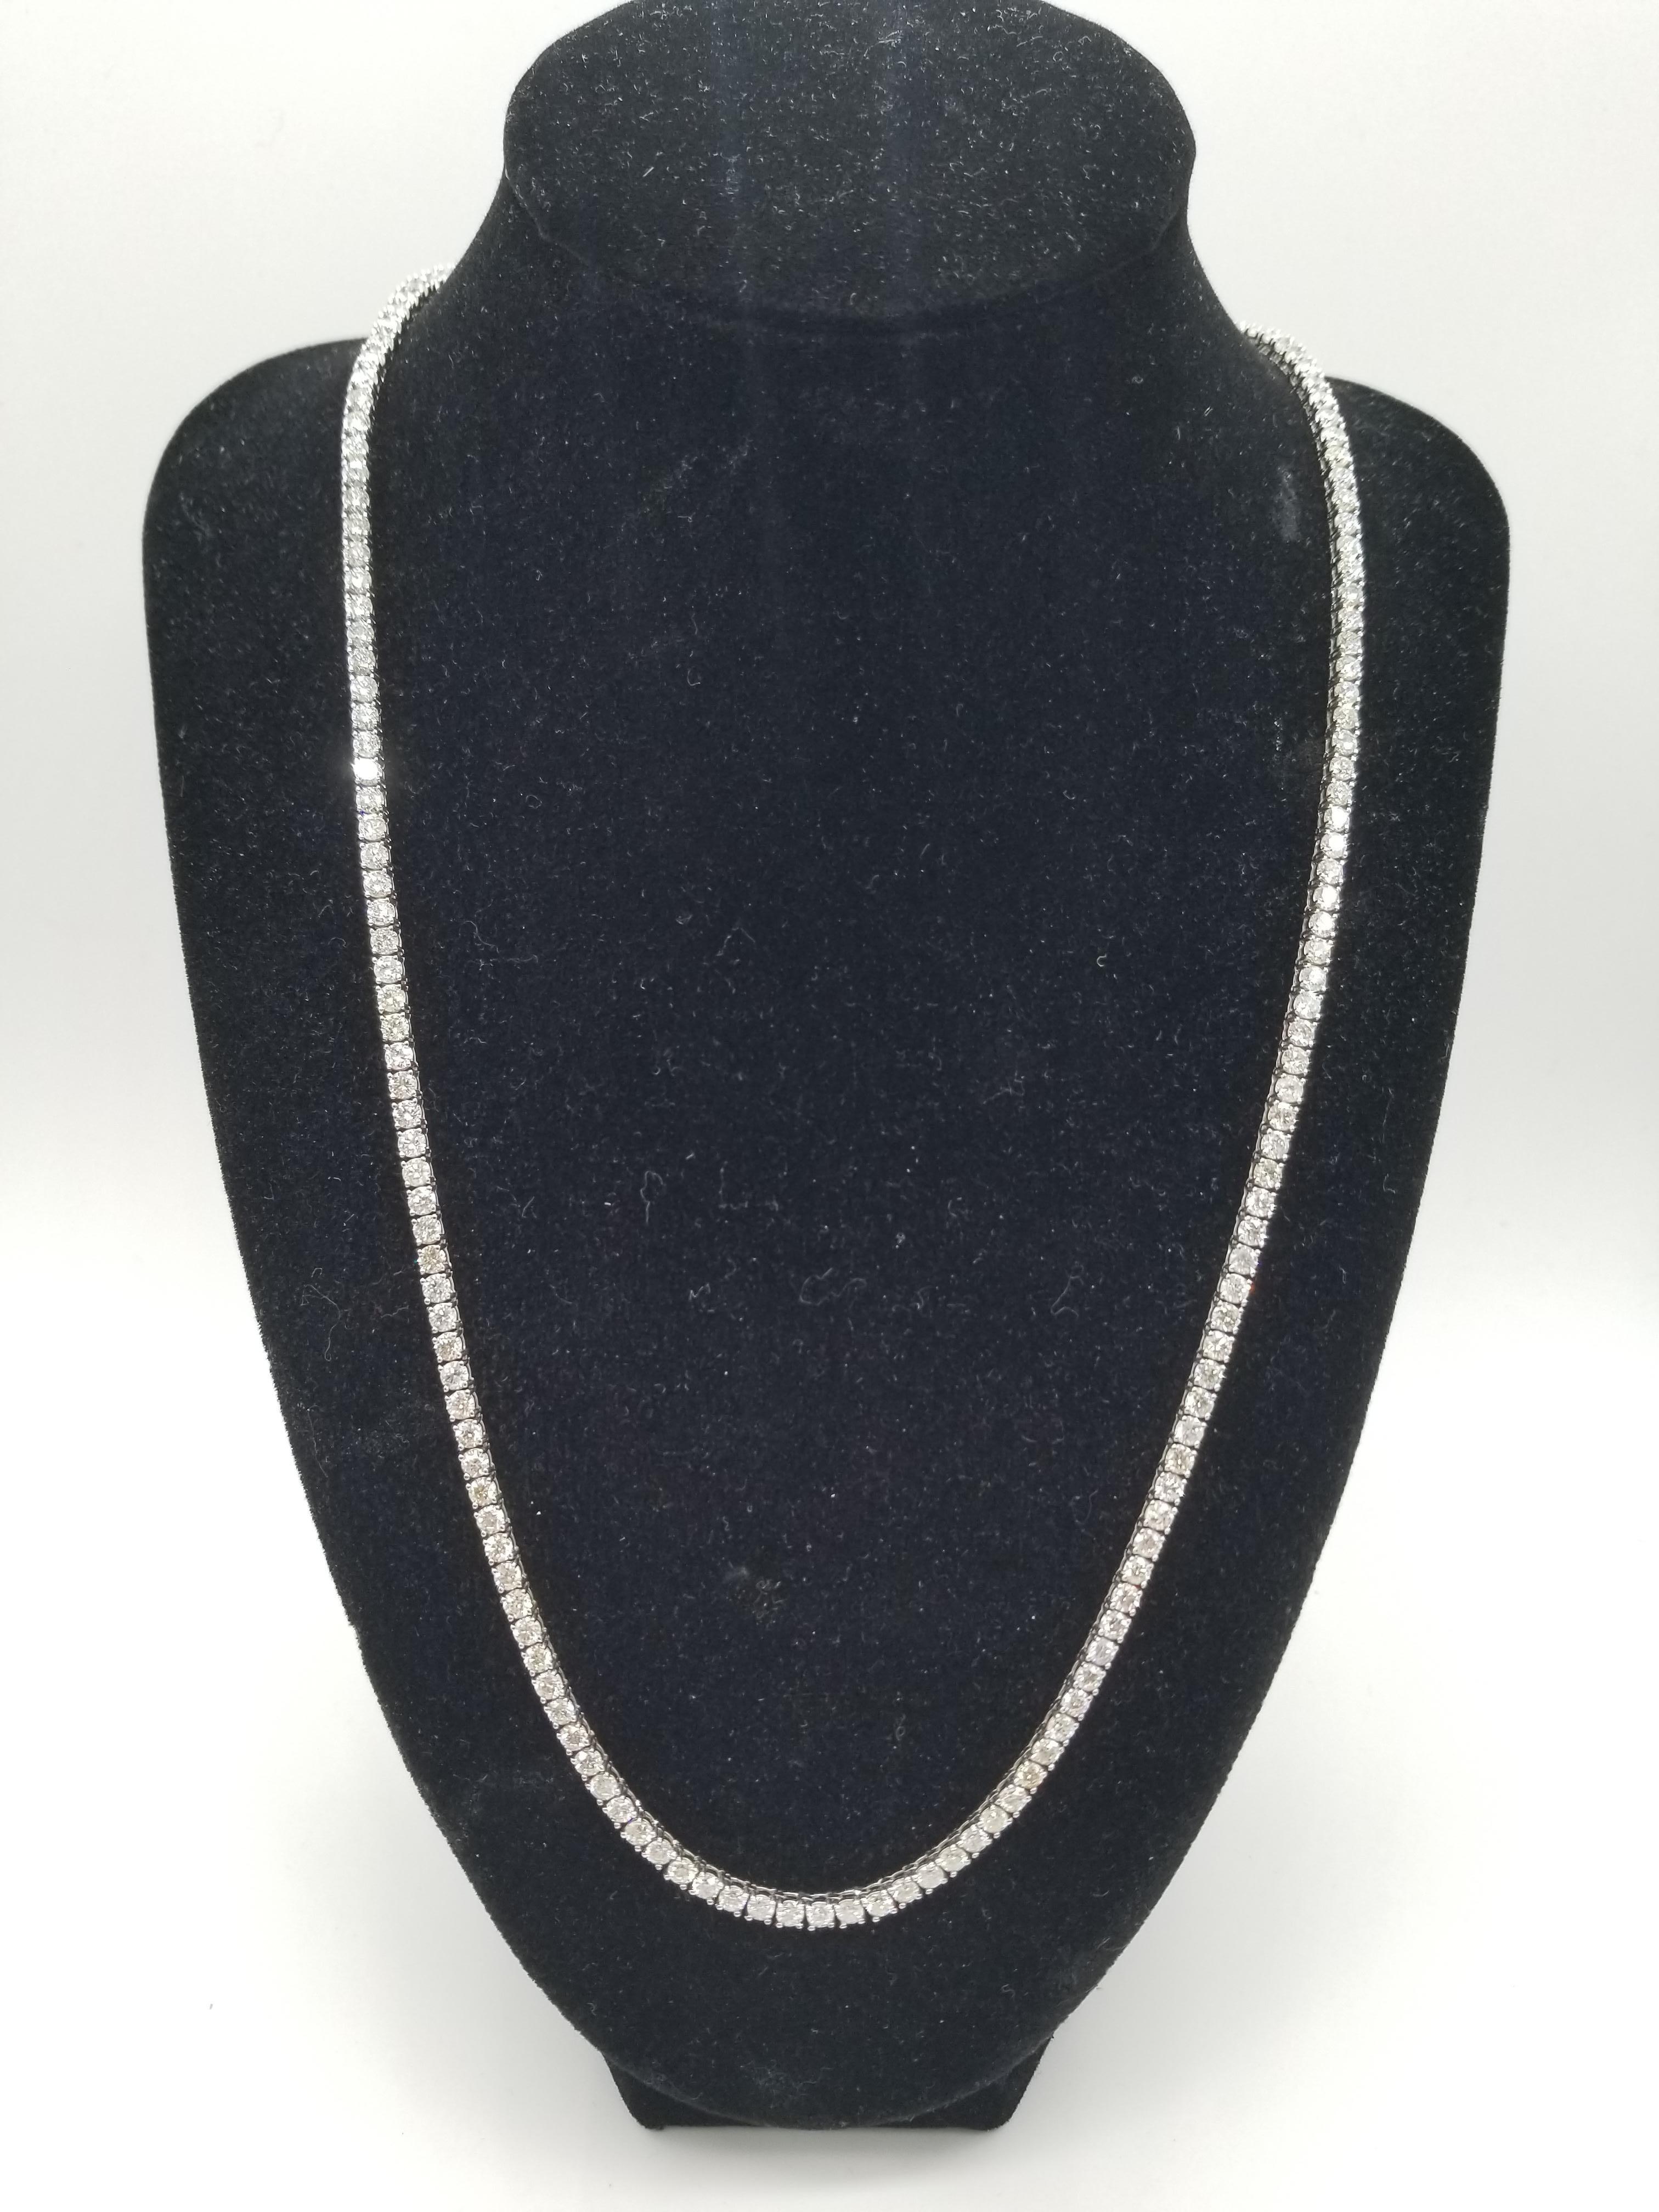 Elegantly simple. Beautiful jewelry 14 Karat White Gold Round Brilliant Cut Diamond Tennis Necklace set on 4 prong setting. The total diamond weight is 16.58 carats. The closure is an insert clasp with safety clasp. Length is 22 inches. Average H-I